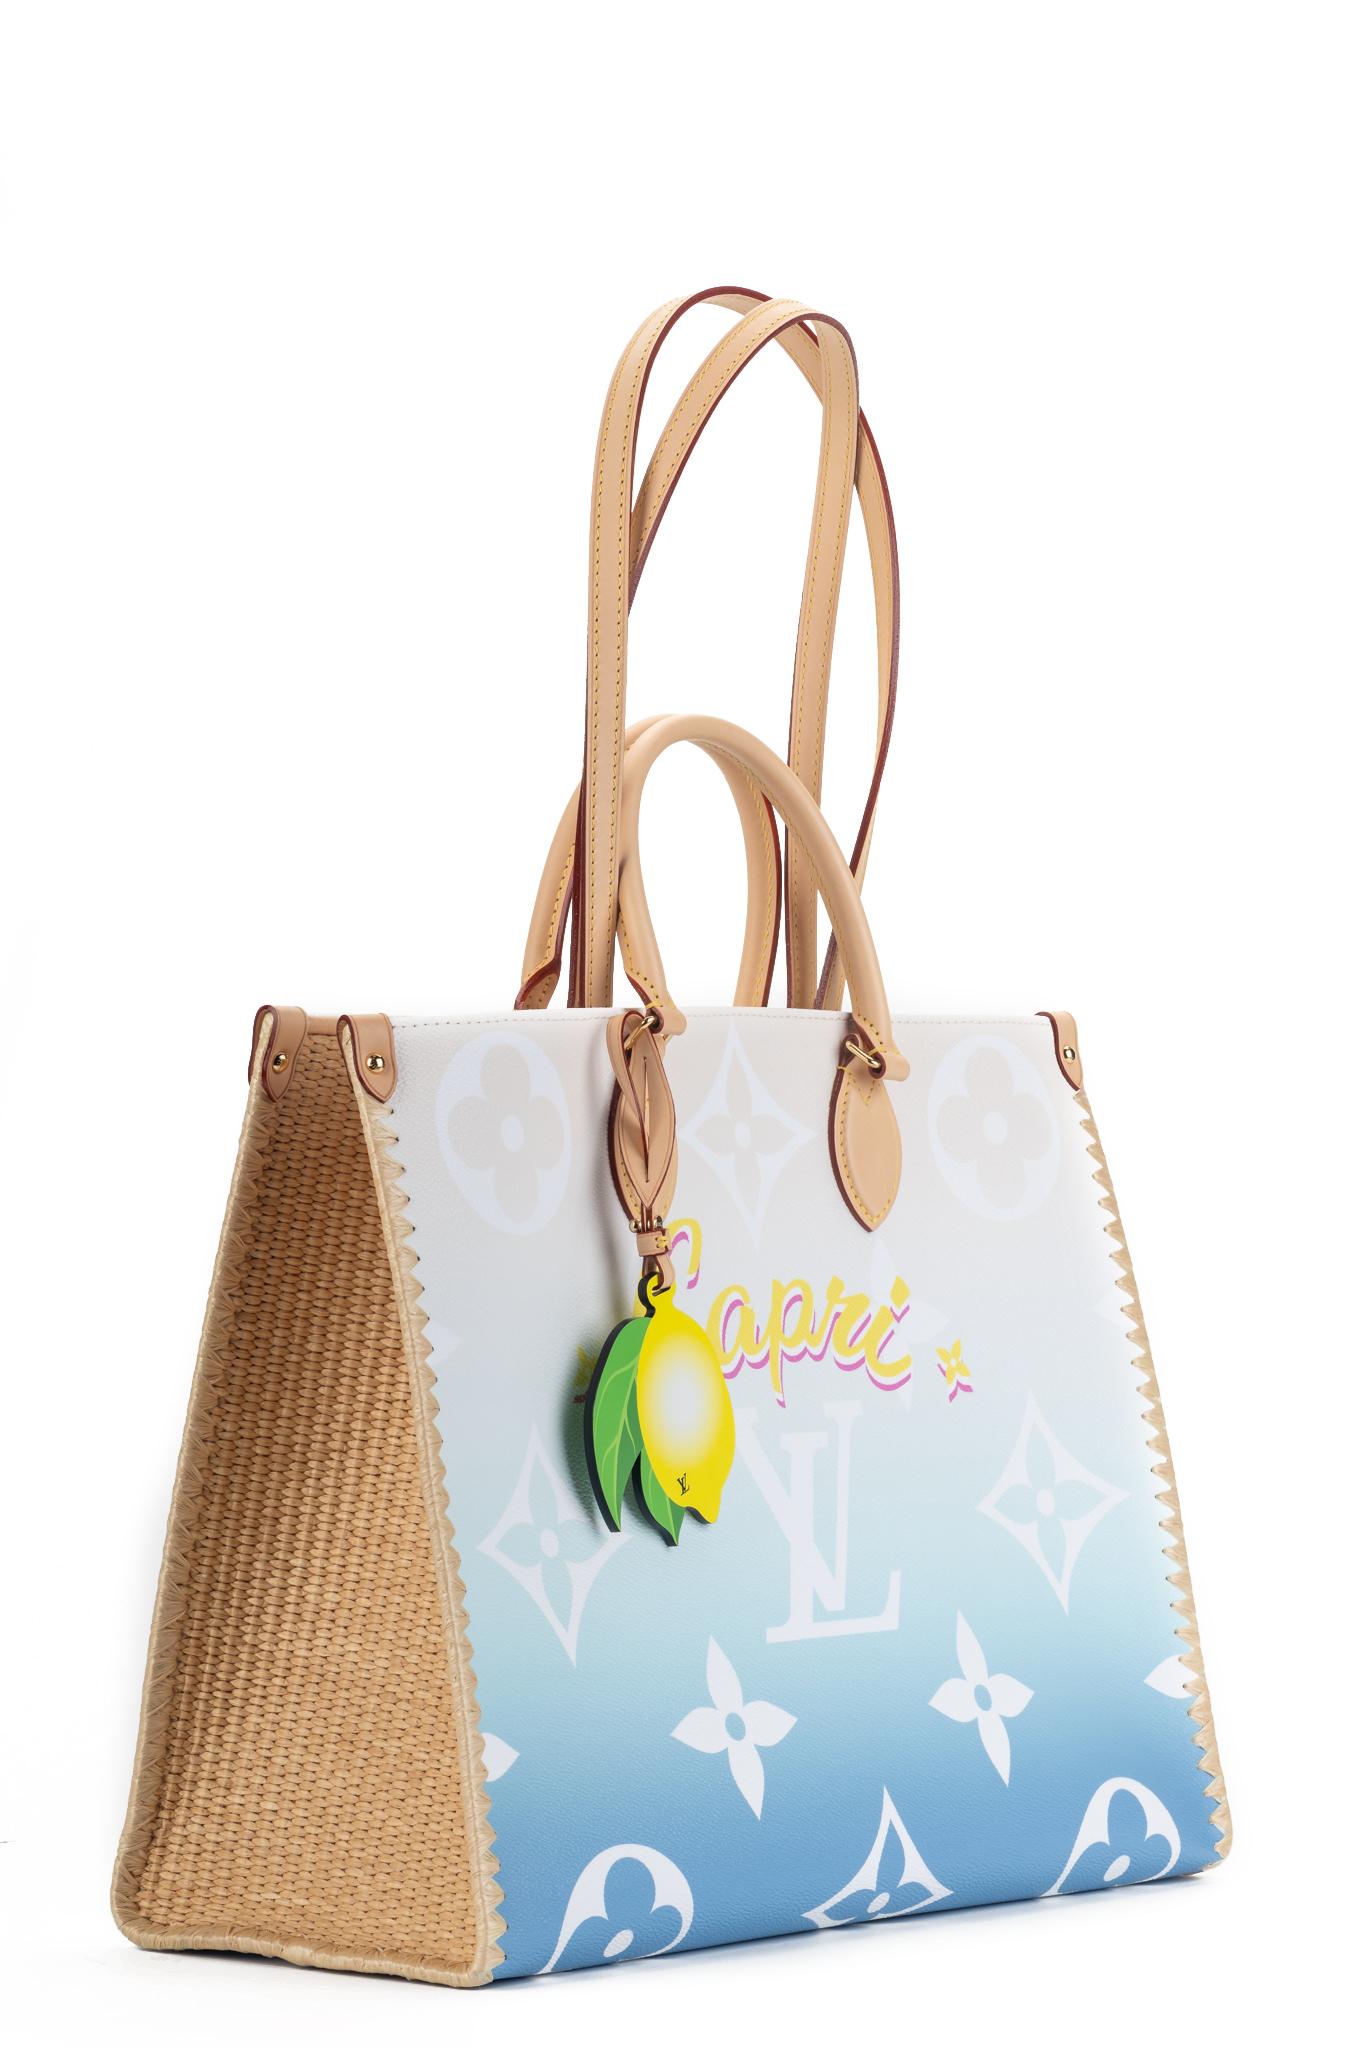 Louis Vuitton celebrates the summer and the reopening of its resorts in the most beautiful Italian holiday destinations with a new and exclusive limited edition of the famous OnTheGo tote bag. Limited edition Capri bag with signature lemon charm.